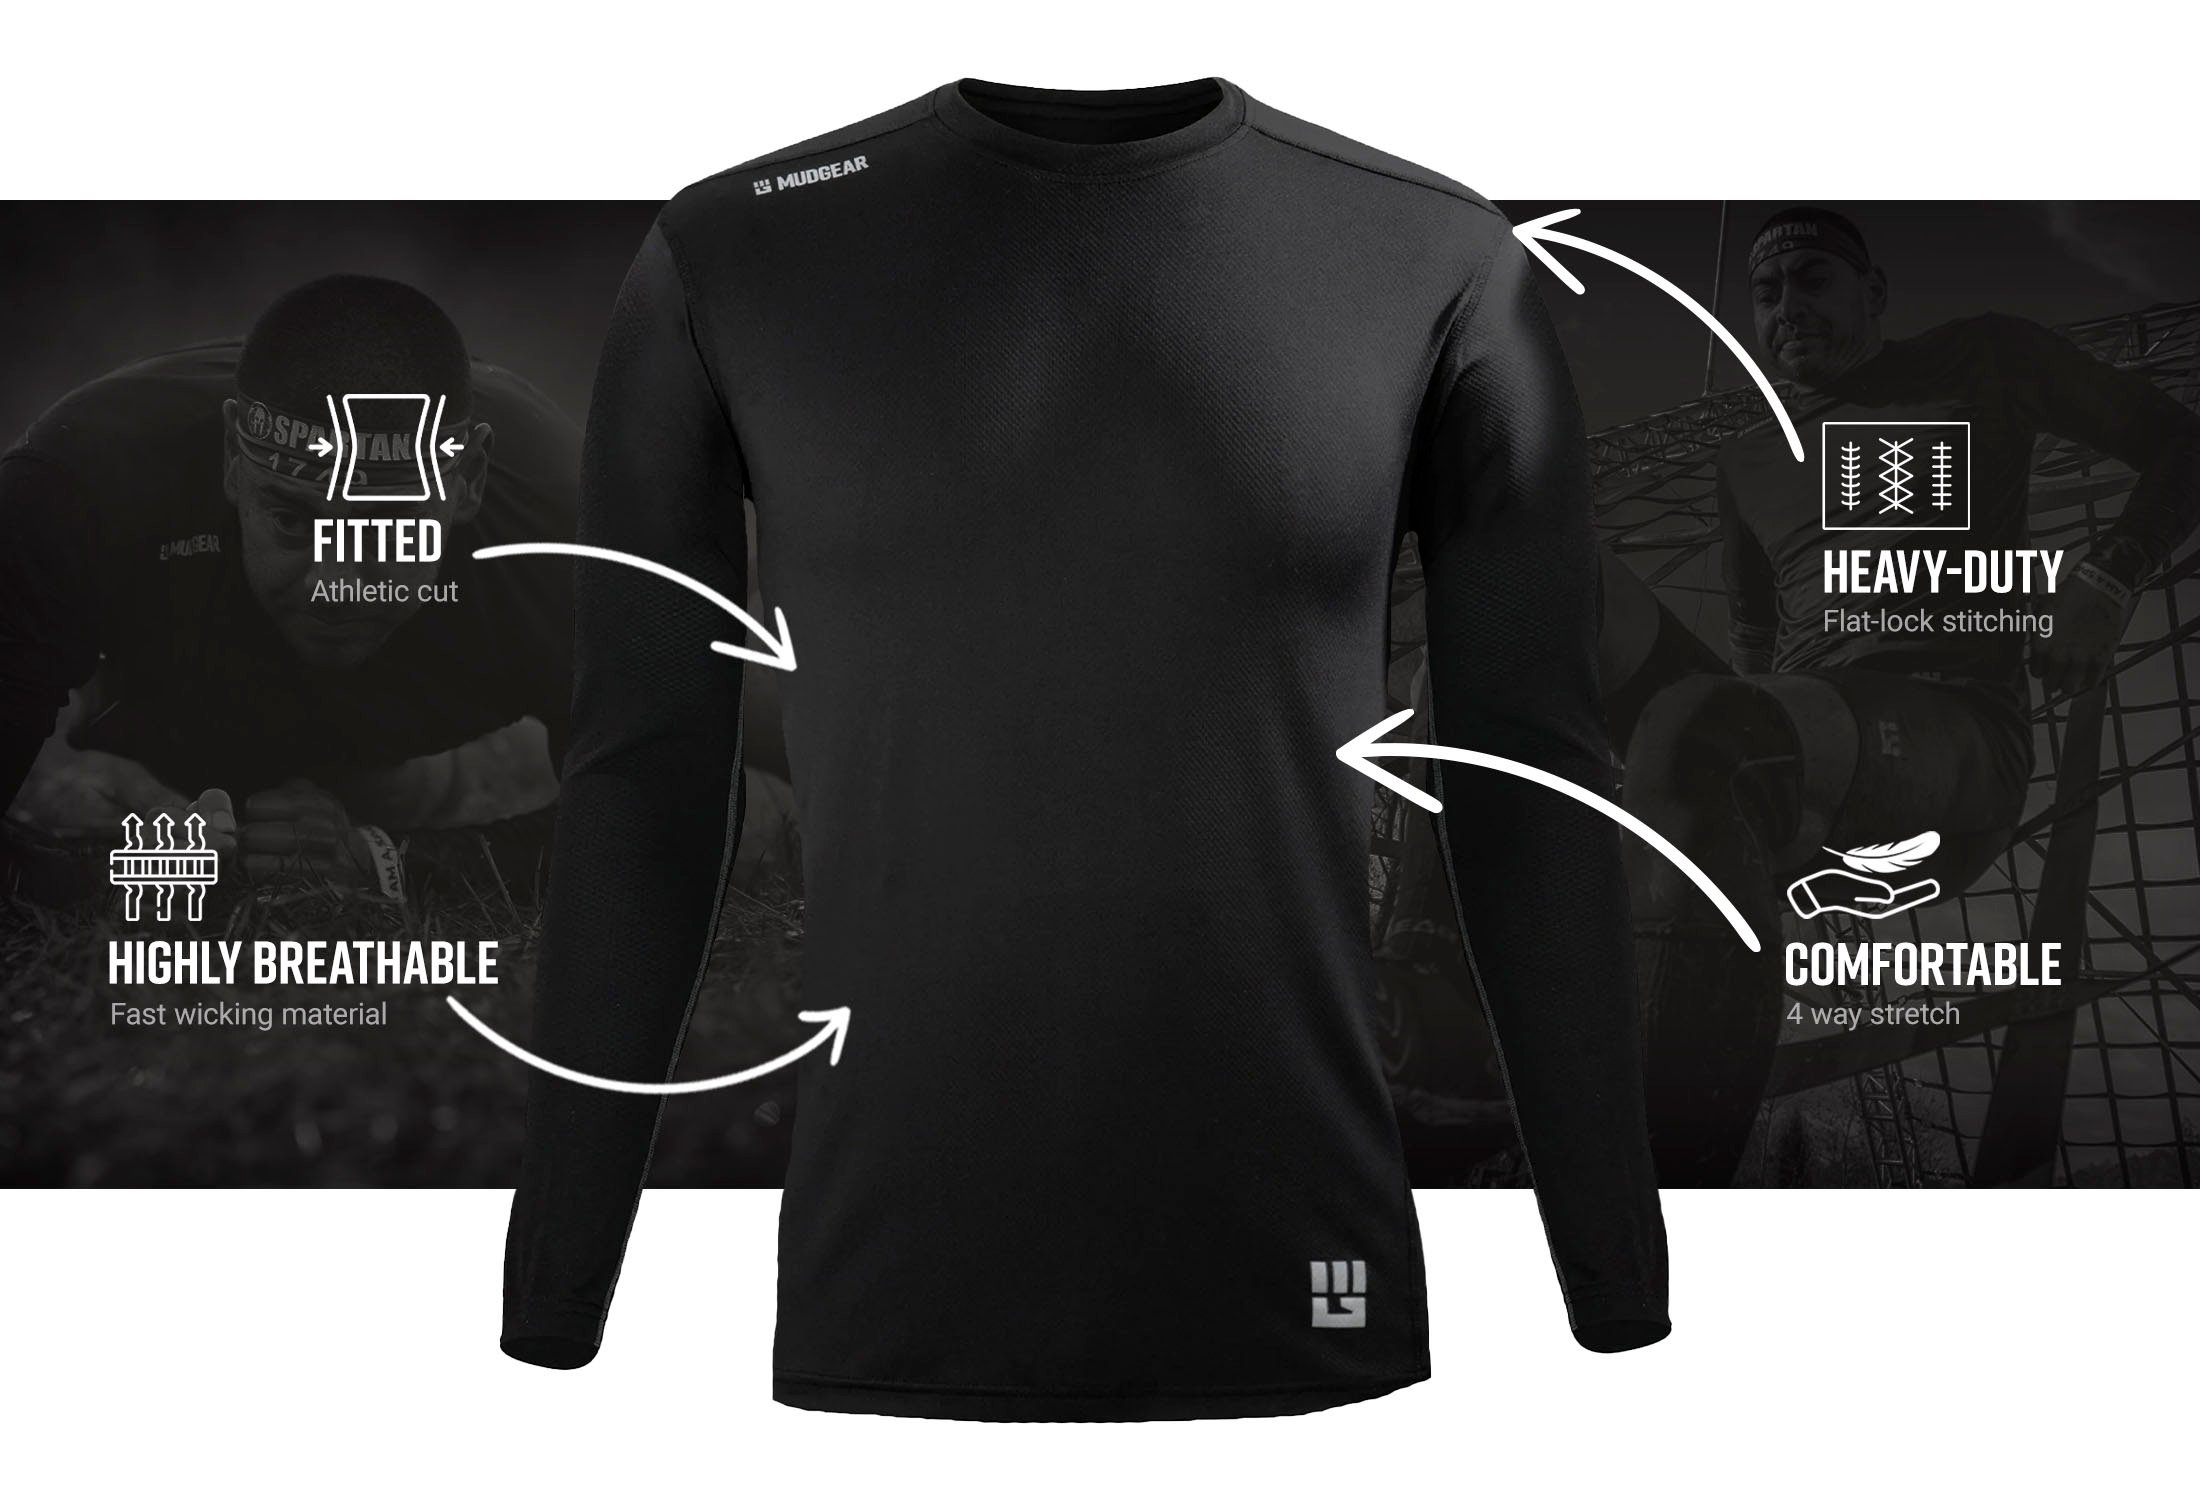 Infographic of Men's Fitted Performance Shirt VX - Long Sleeve (Black)